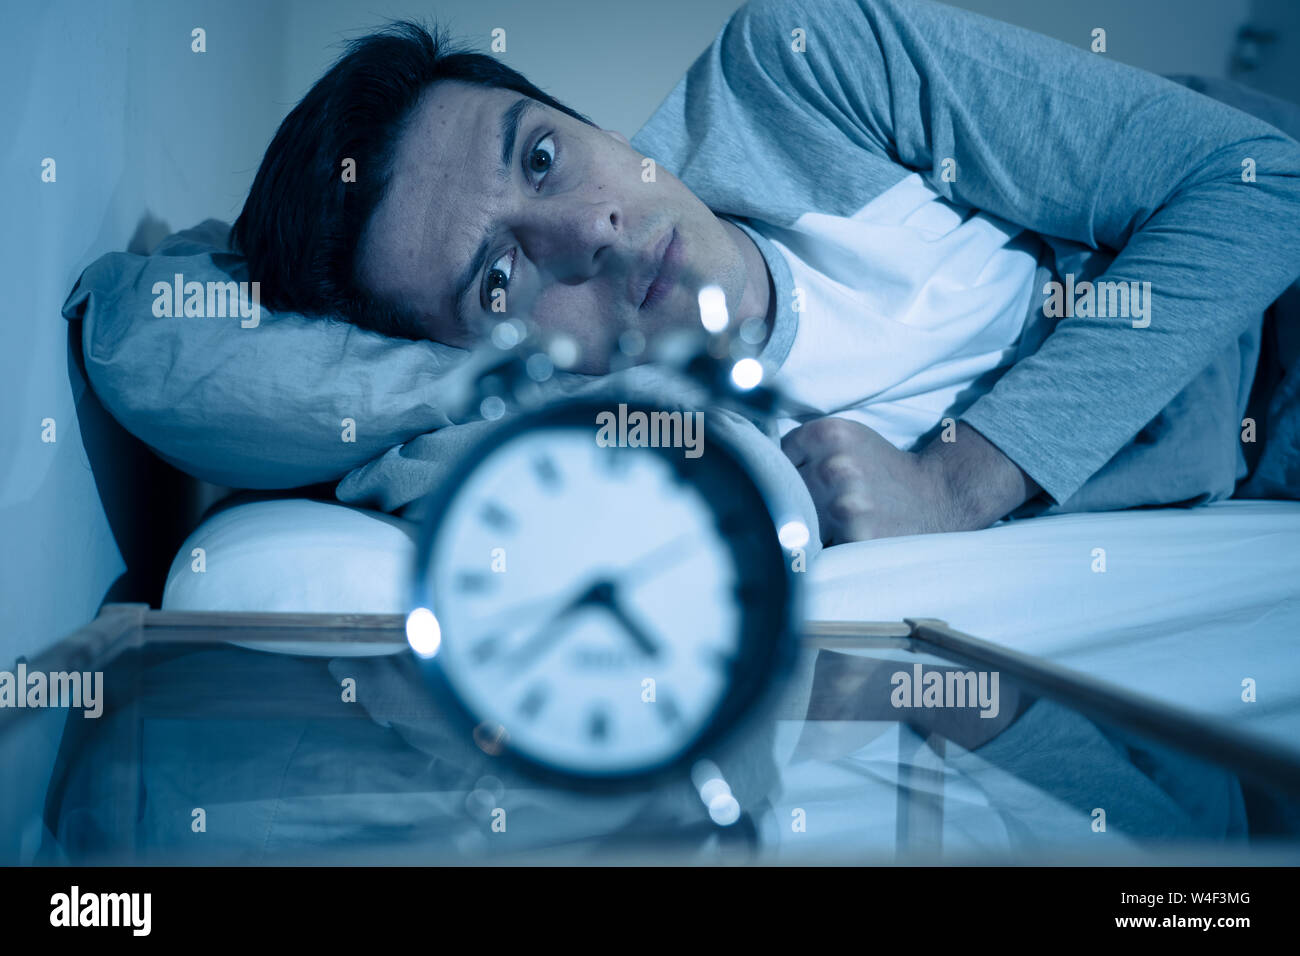 Sleepless and desperate young caucasian man awake at night not able to sleep, feeling frustrated and worried looking at clock suffering from insomnia Stock Photo